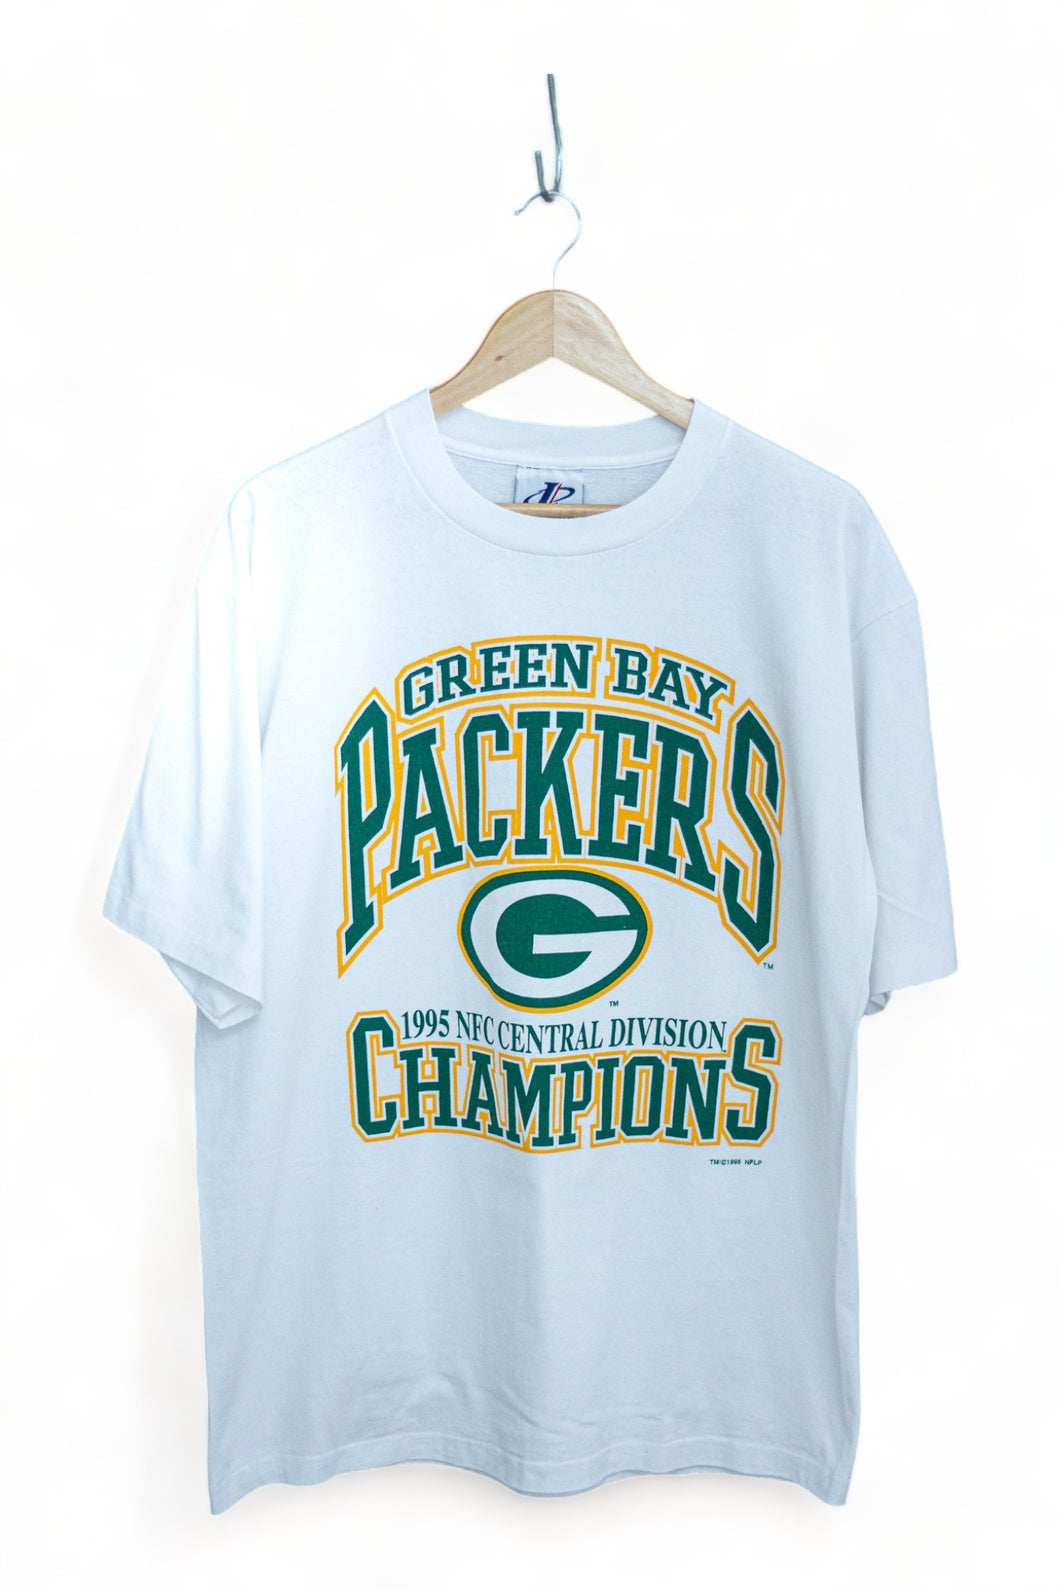 Green Bay Packers - 1995 NFC Central Champions T-Shirt (L)